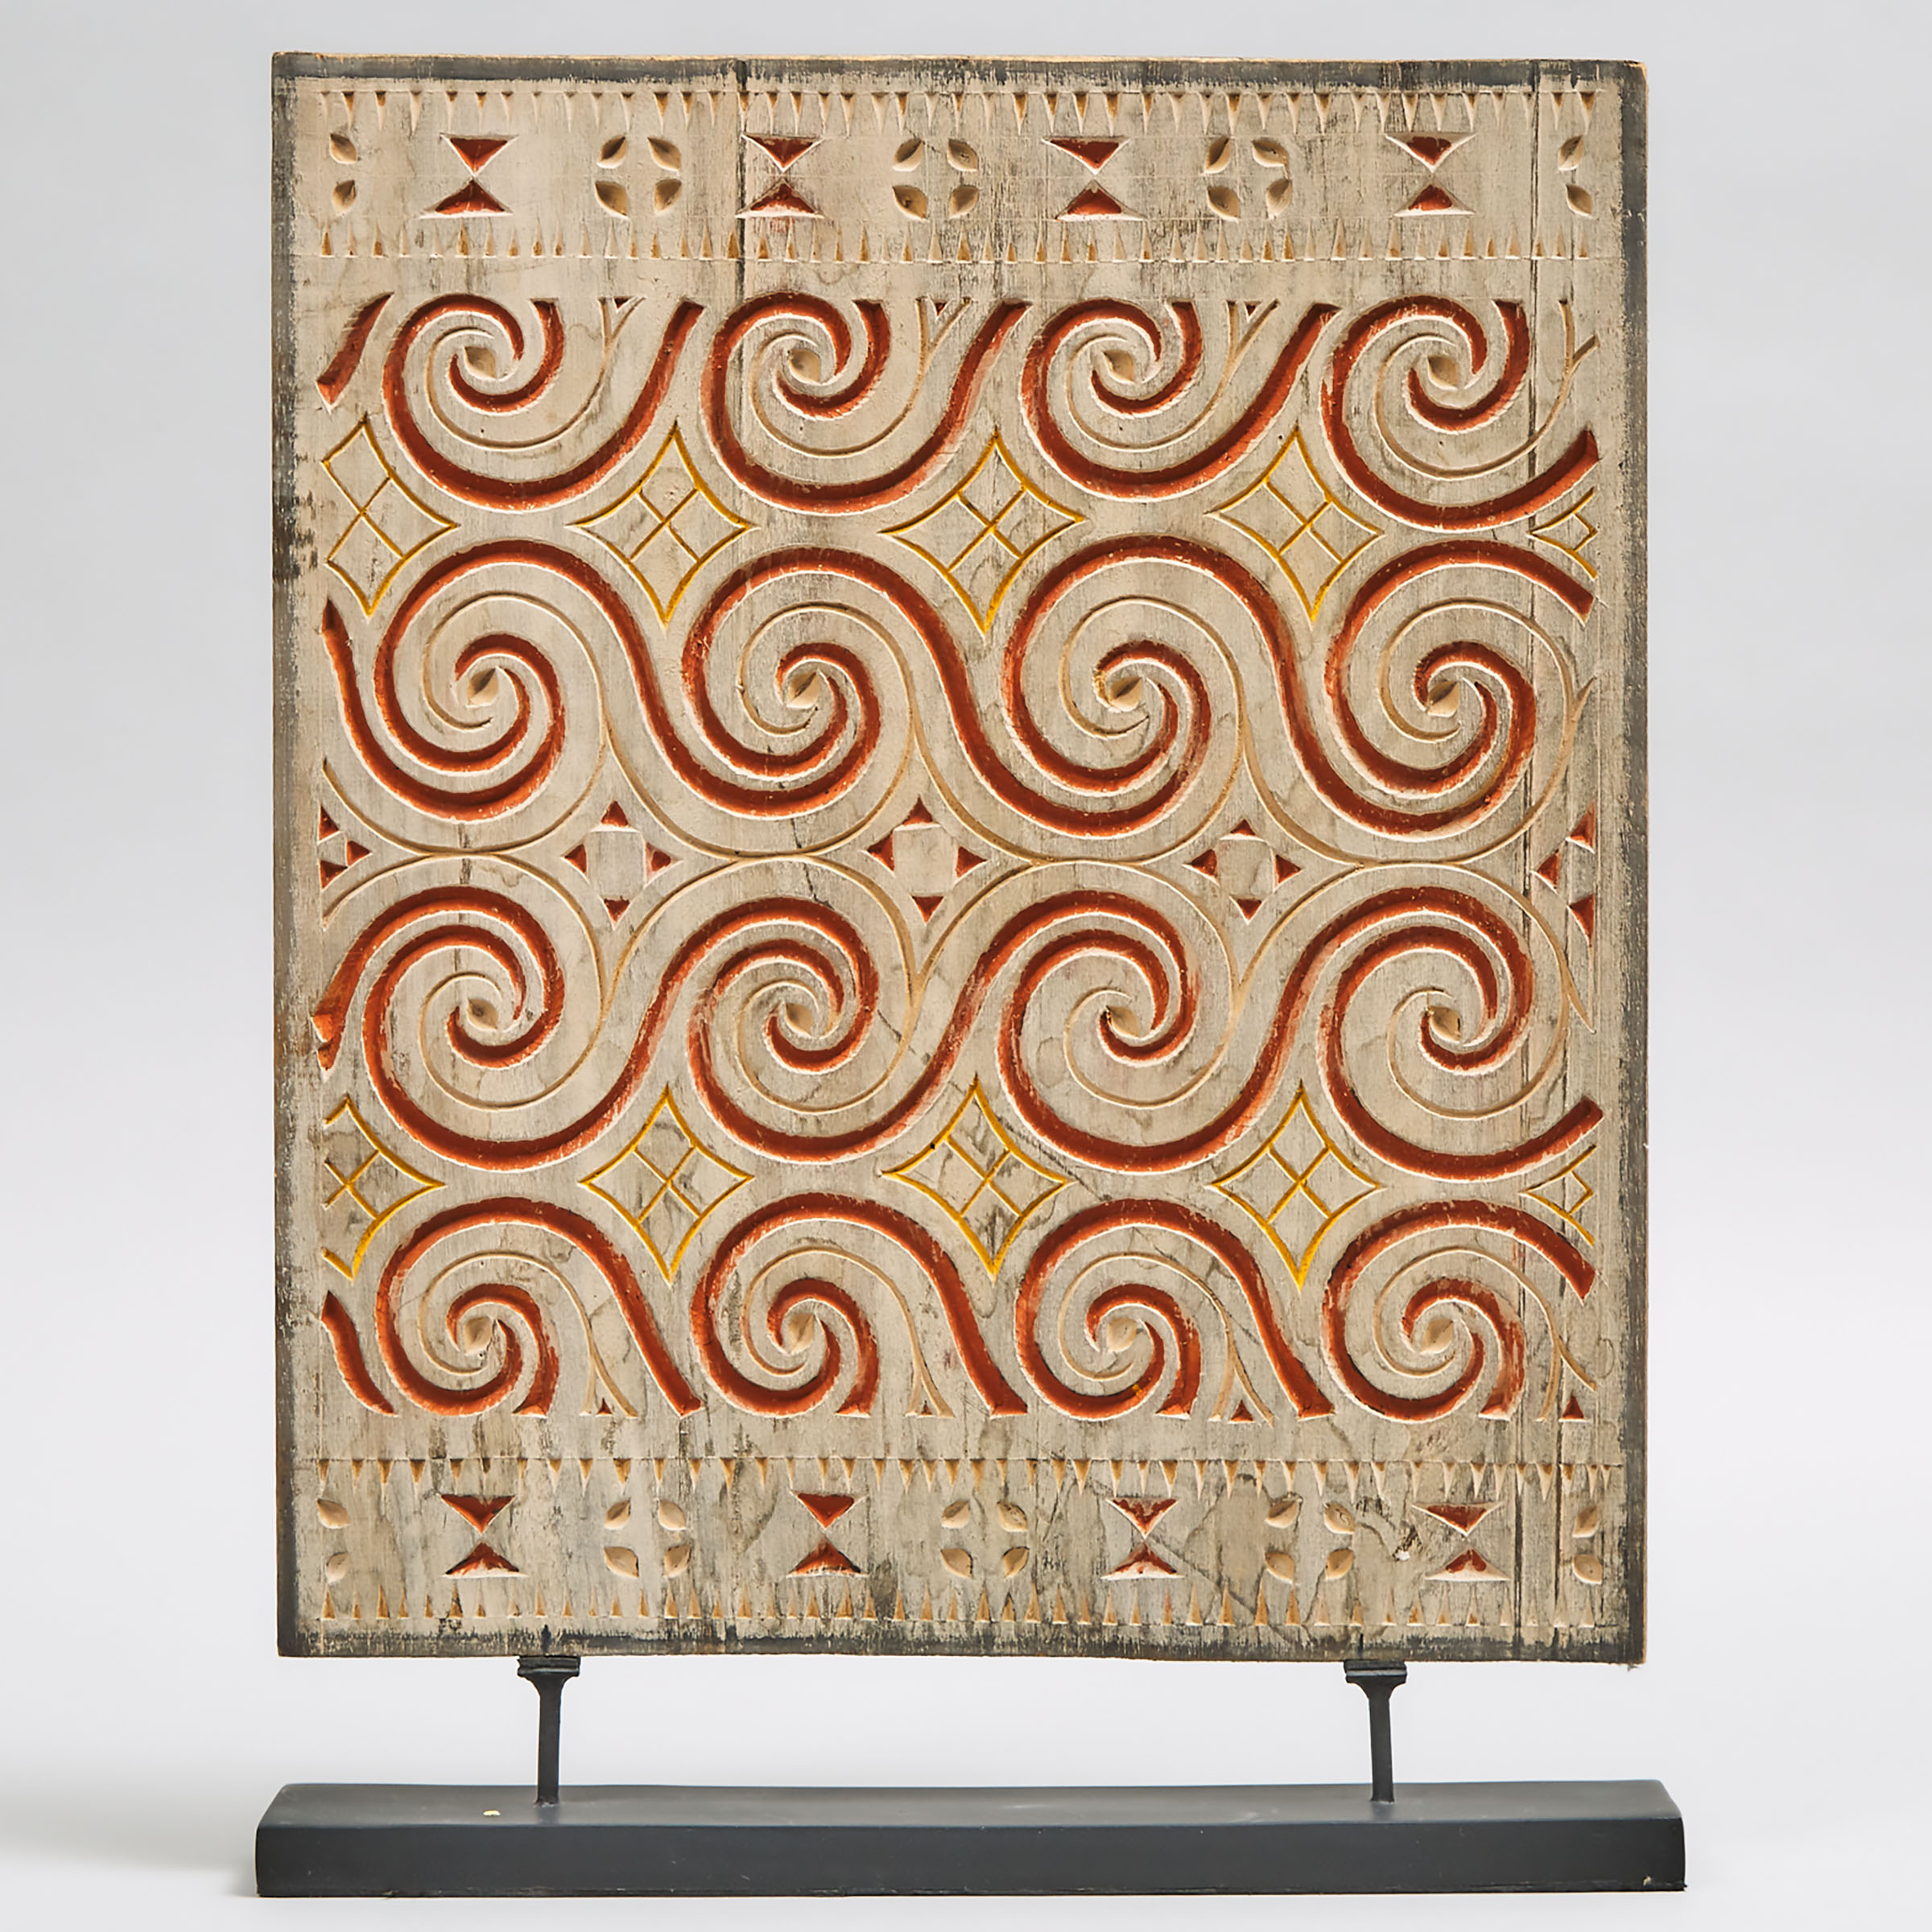 Polynesian Sunk Relief Carved and Painted Hardwood Panel, early-mid 20th century